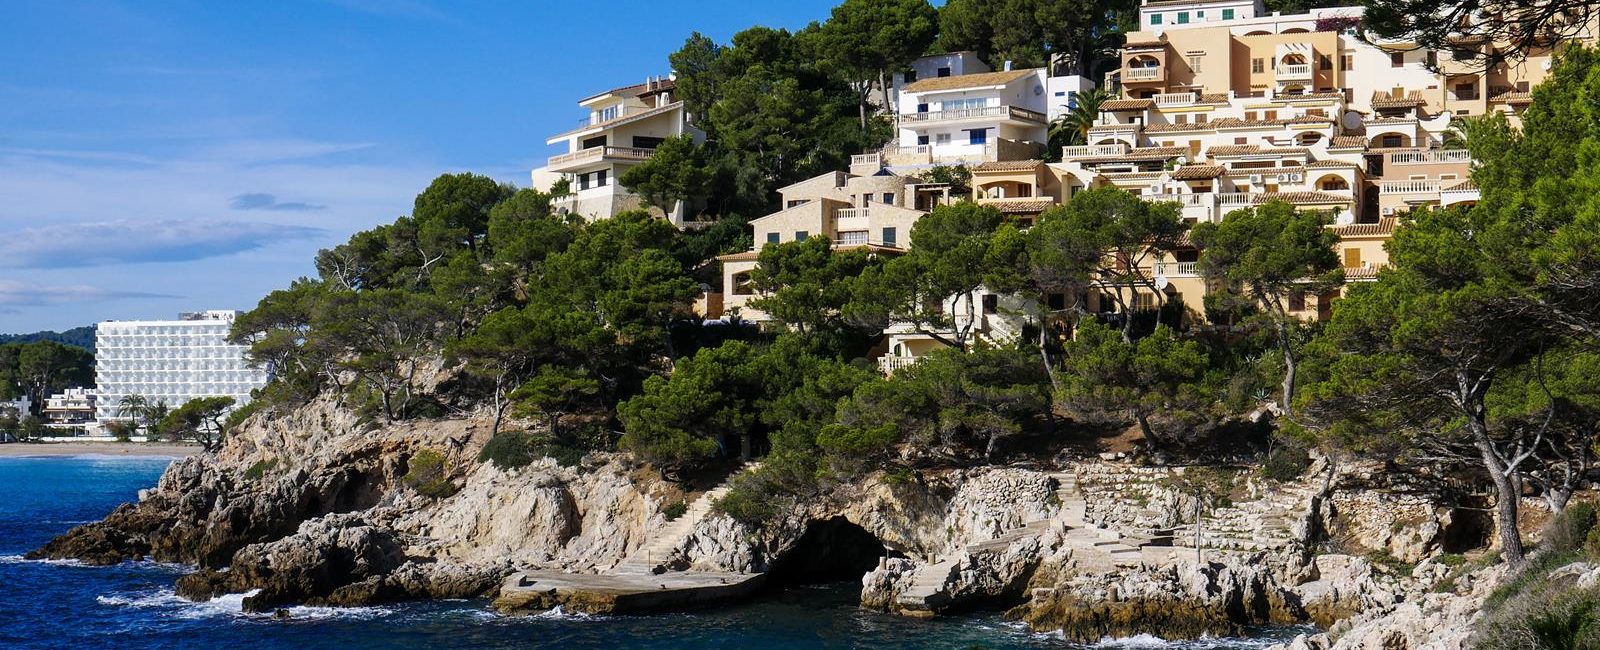 Canyamel – the most beautiful places in Majorca.